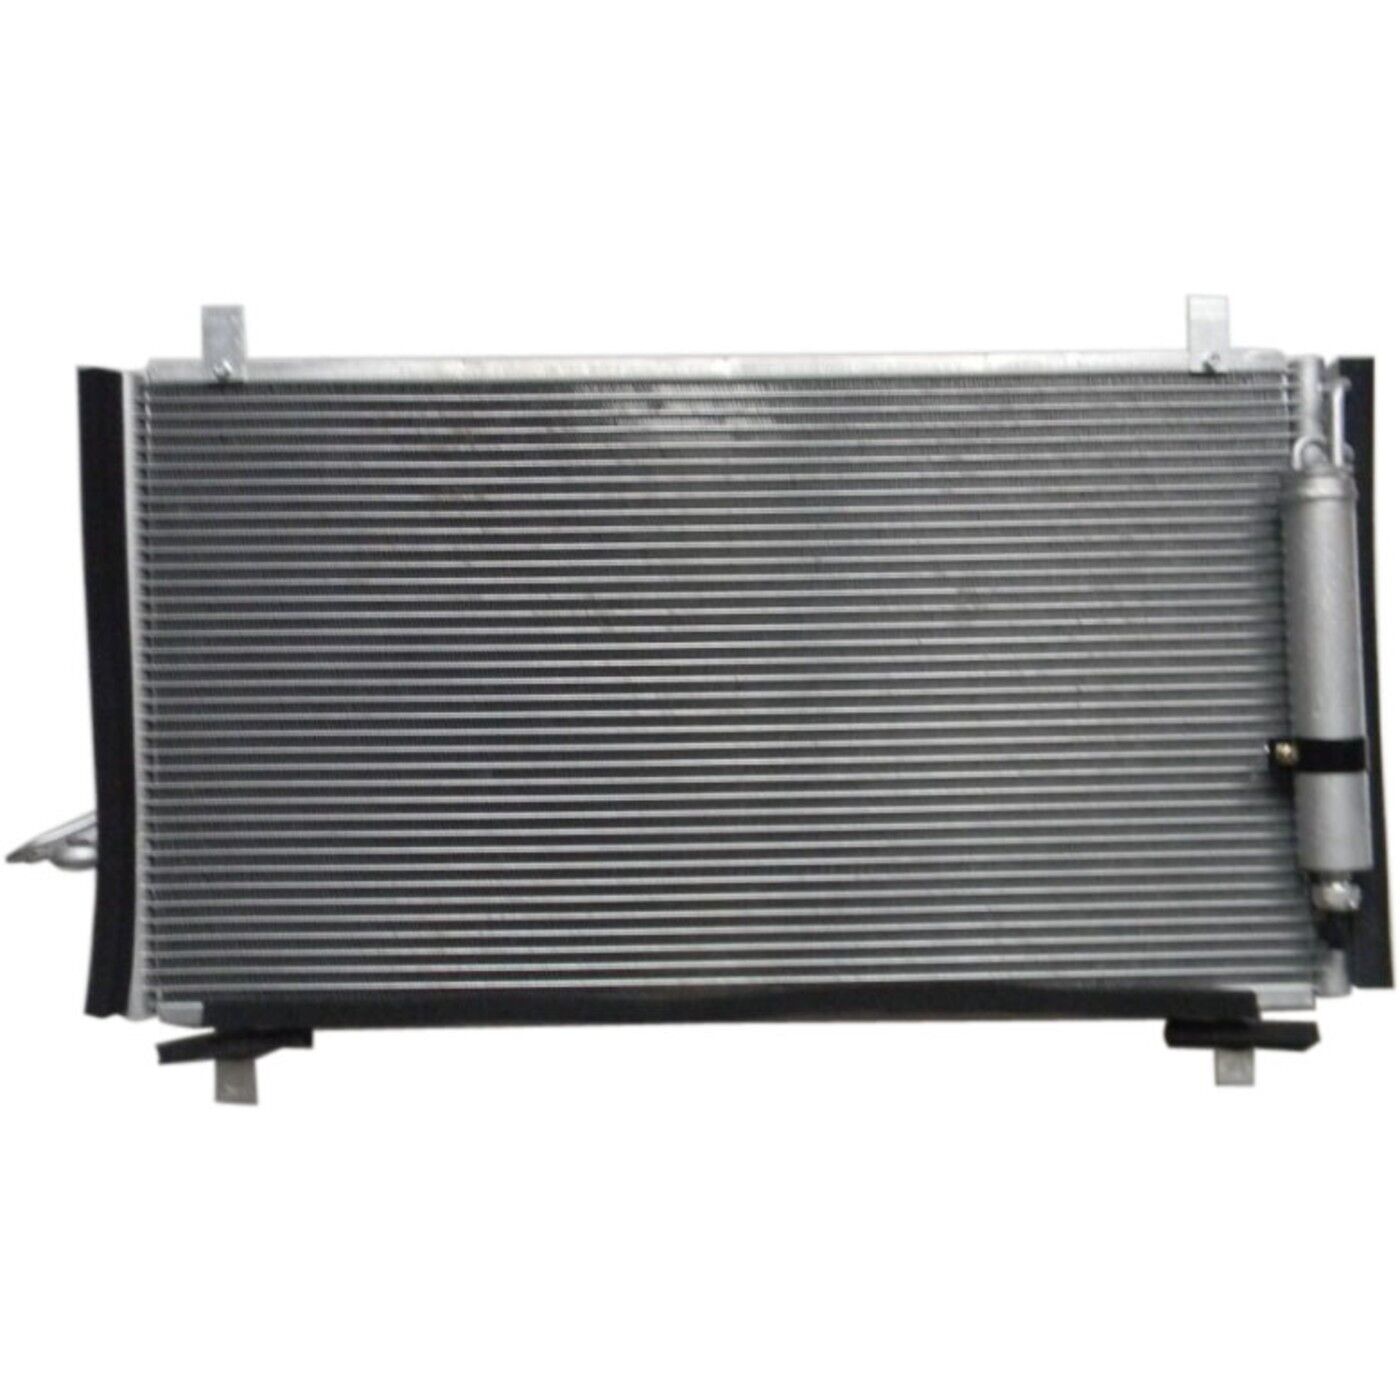 A/C Condenser For 2003-2009 Nissan 350Z With Receiver Drier Aluminum Core